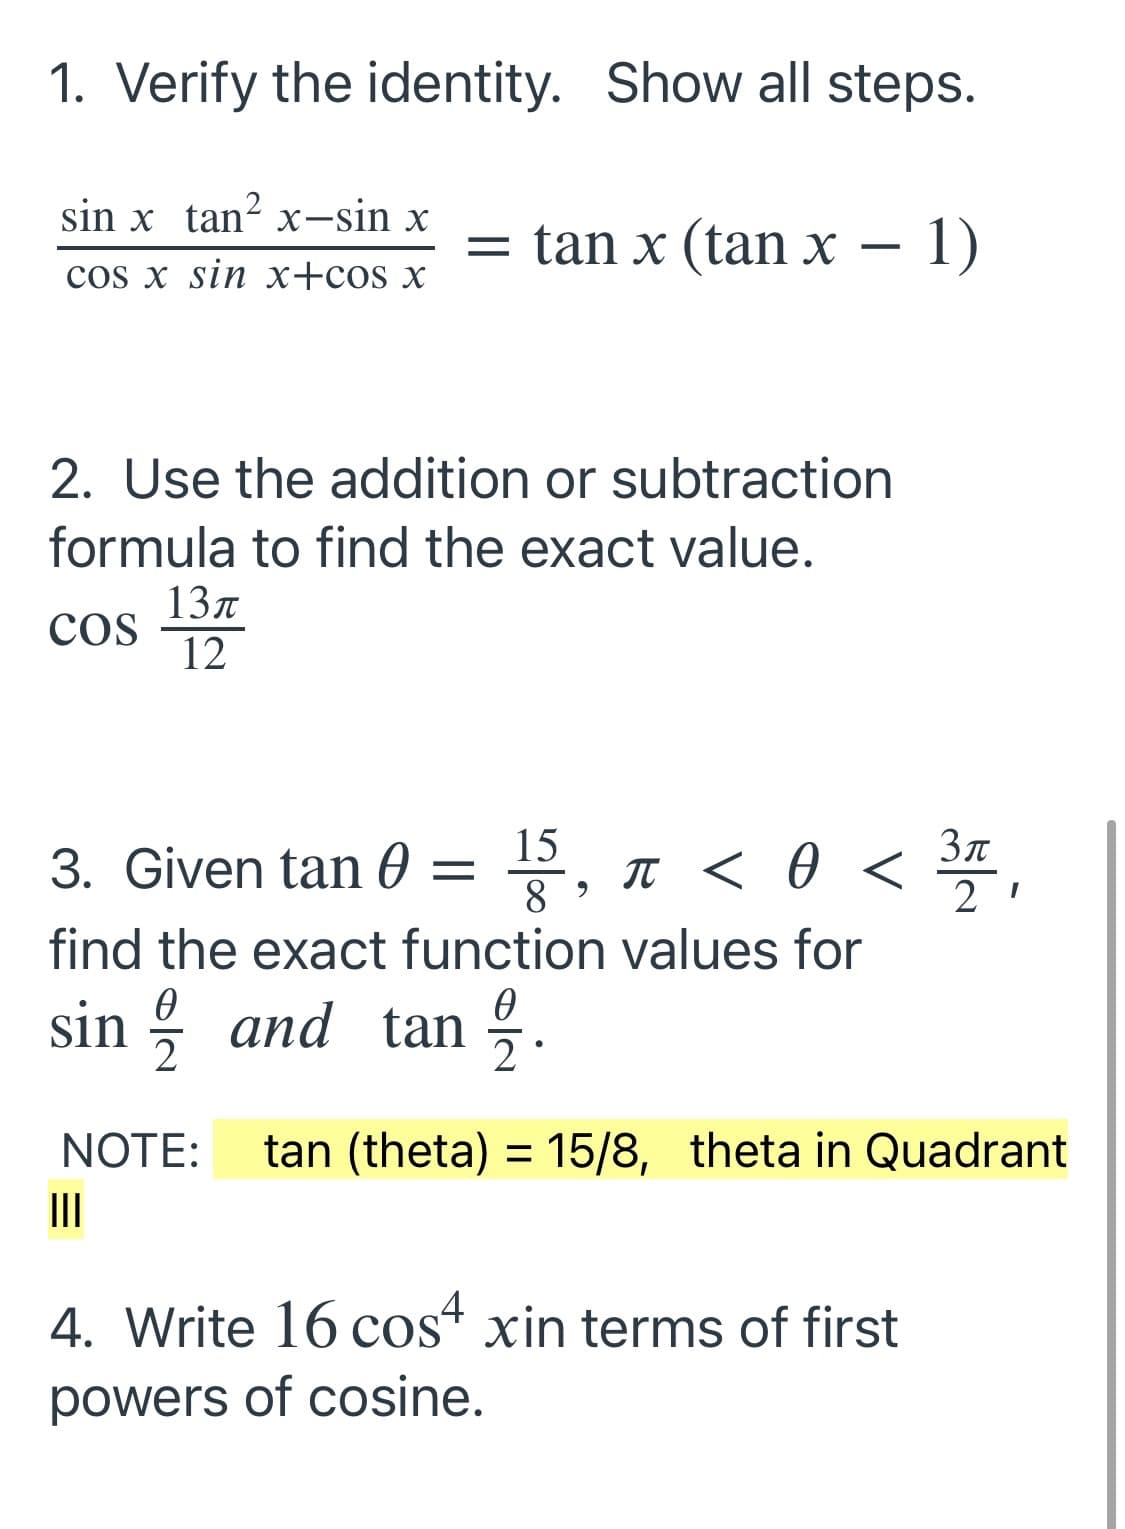 1. Verify the identity. Show all steps.
sin x tan? x-sin x
= tan x (tan x – 1)
cos x sin x+cos x
2. Use the addition or subtraction
formula to find the exact value.
13л
cos
12
15
T < 0 <
Зл
3. Given tan 0 =
8
find the exact function values for
sin ; and tan :.
2
NOTE:
tan (theta) = 15/8, theta in Quadrant
II
4. Write 16 cos“ xin terms of first
powers of cosine.
